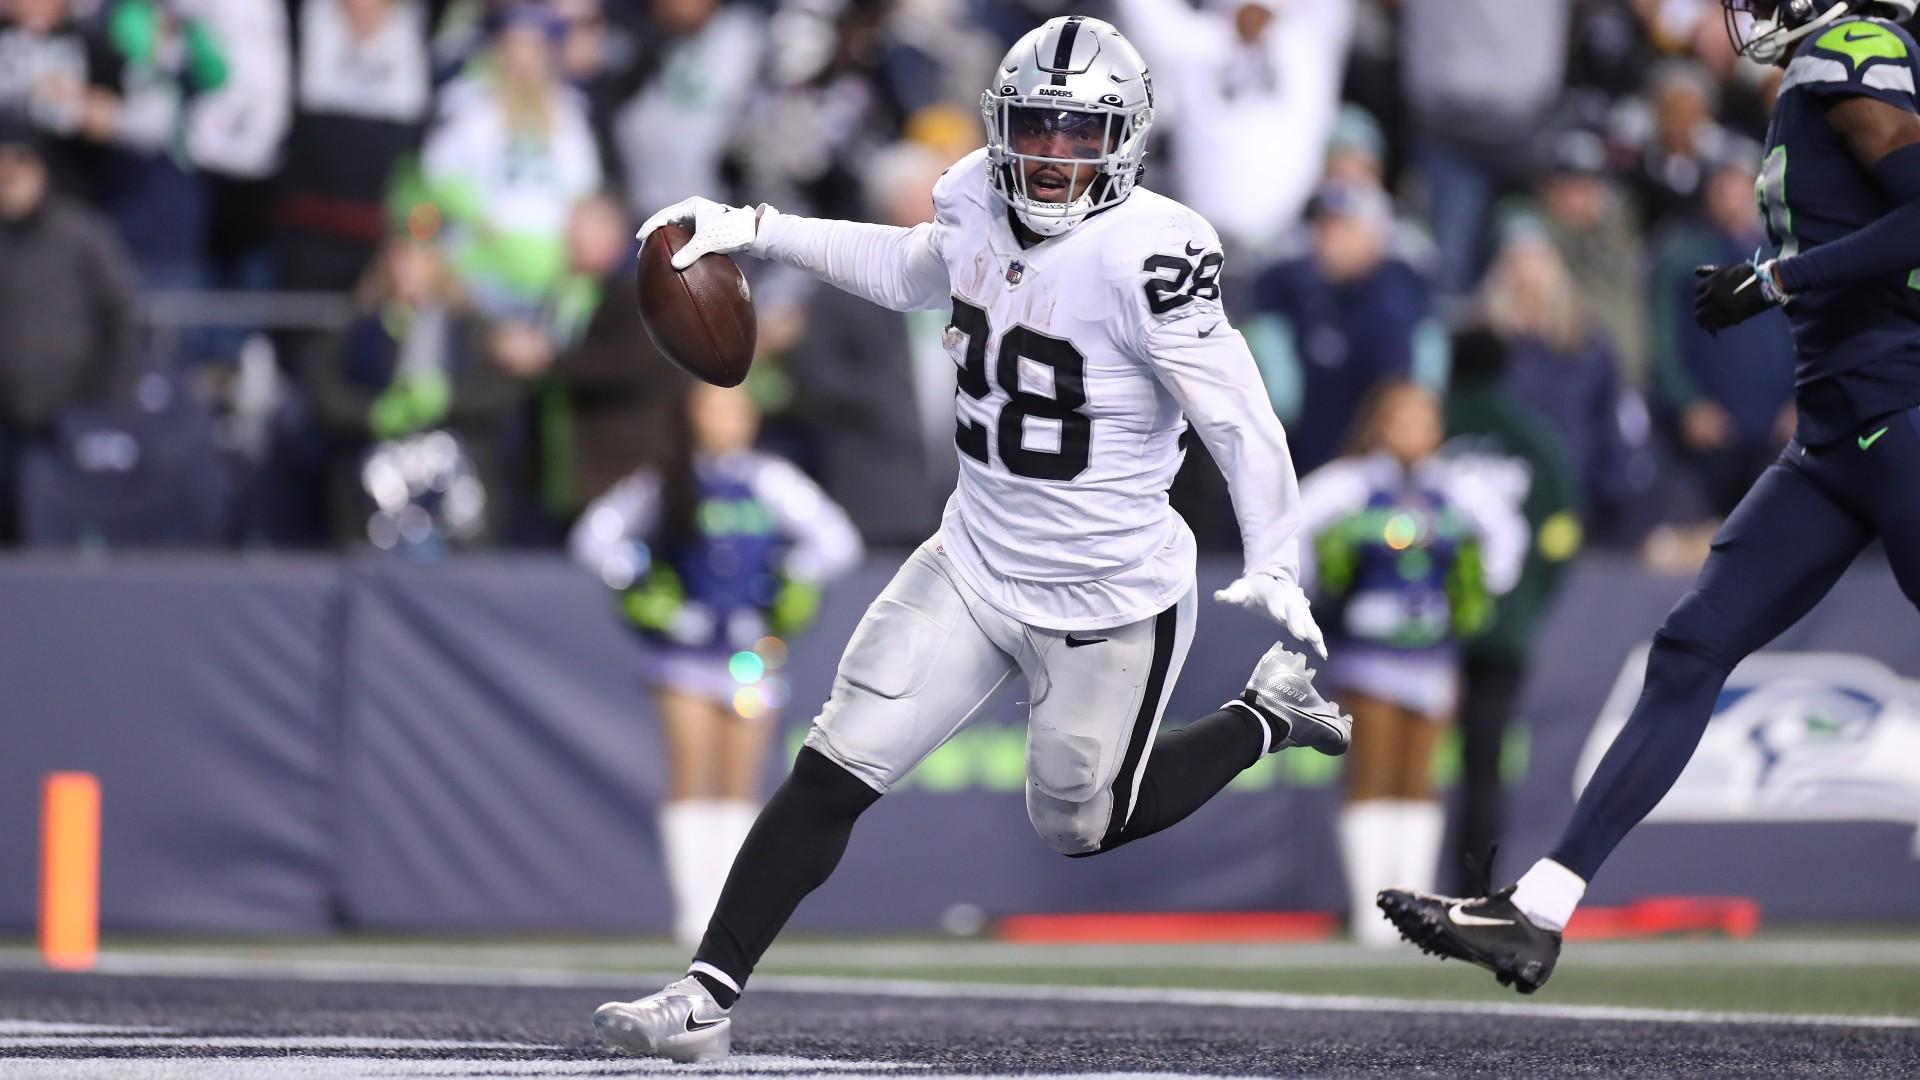 Breaking The Stalemate: Raiders, Josh Jacobs, and Dave Ziegler